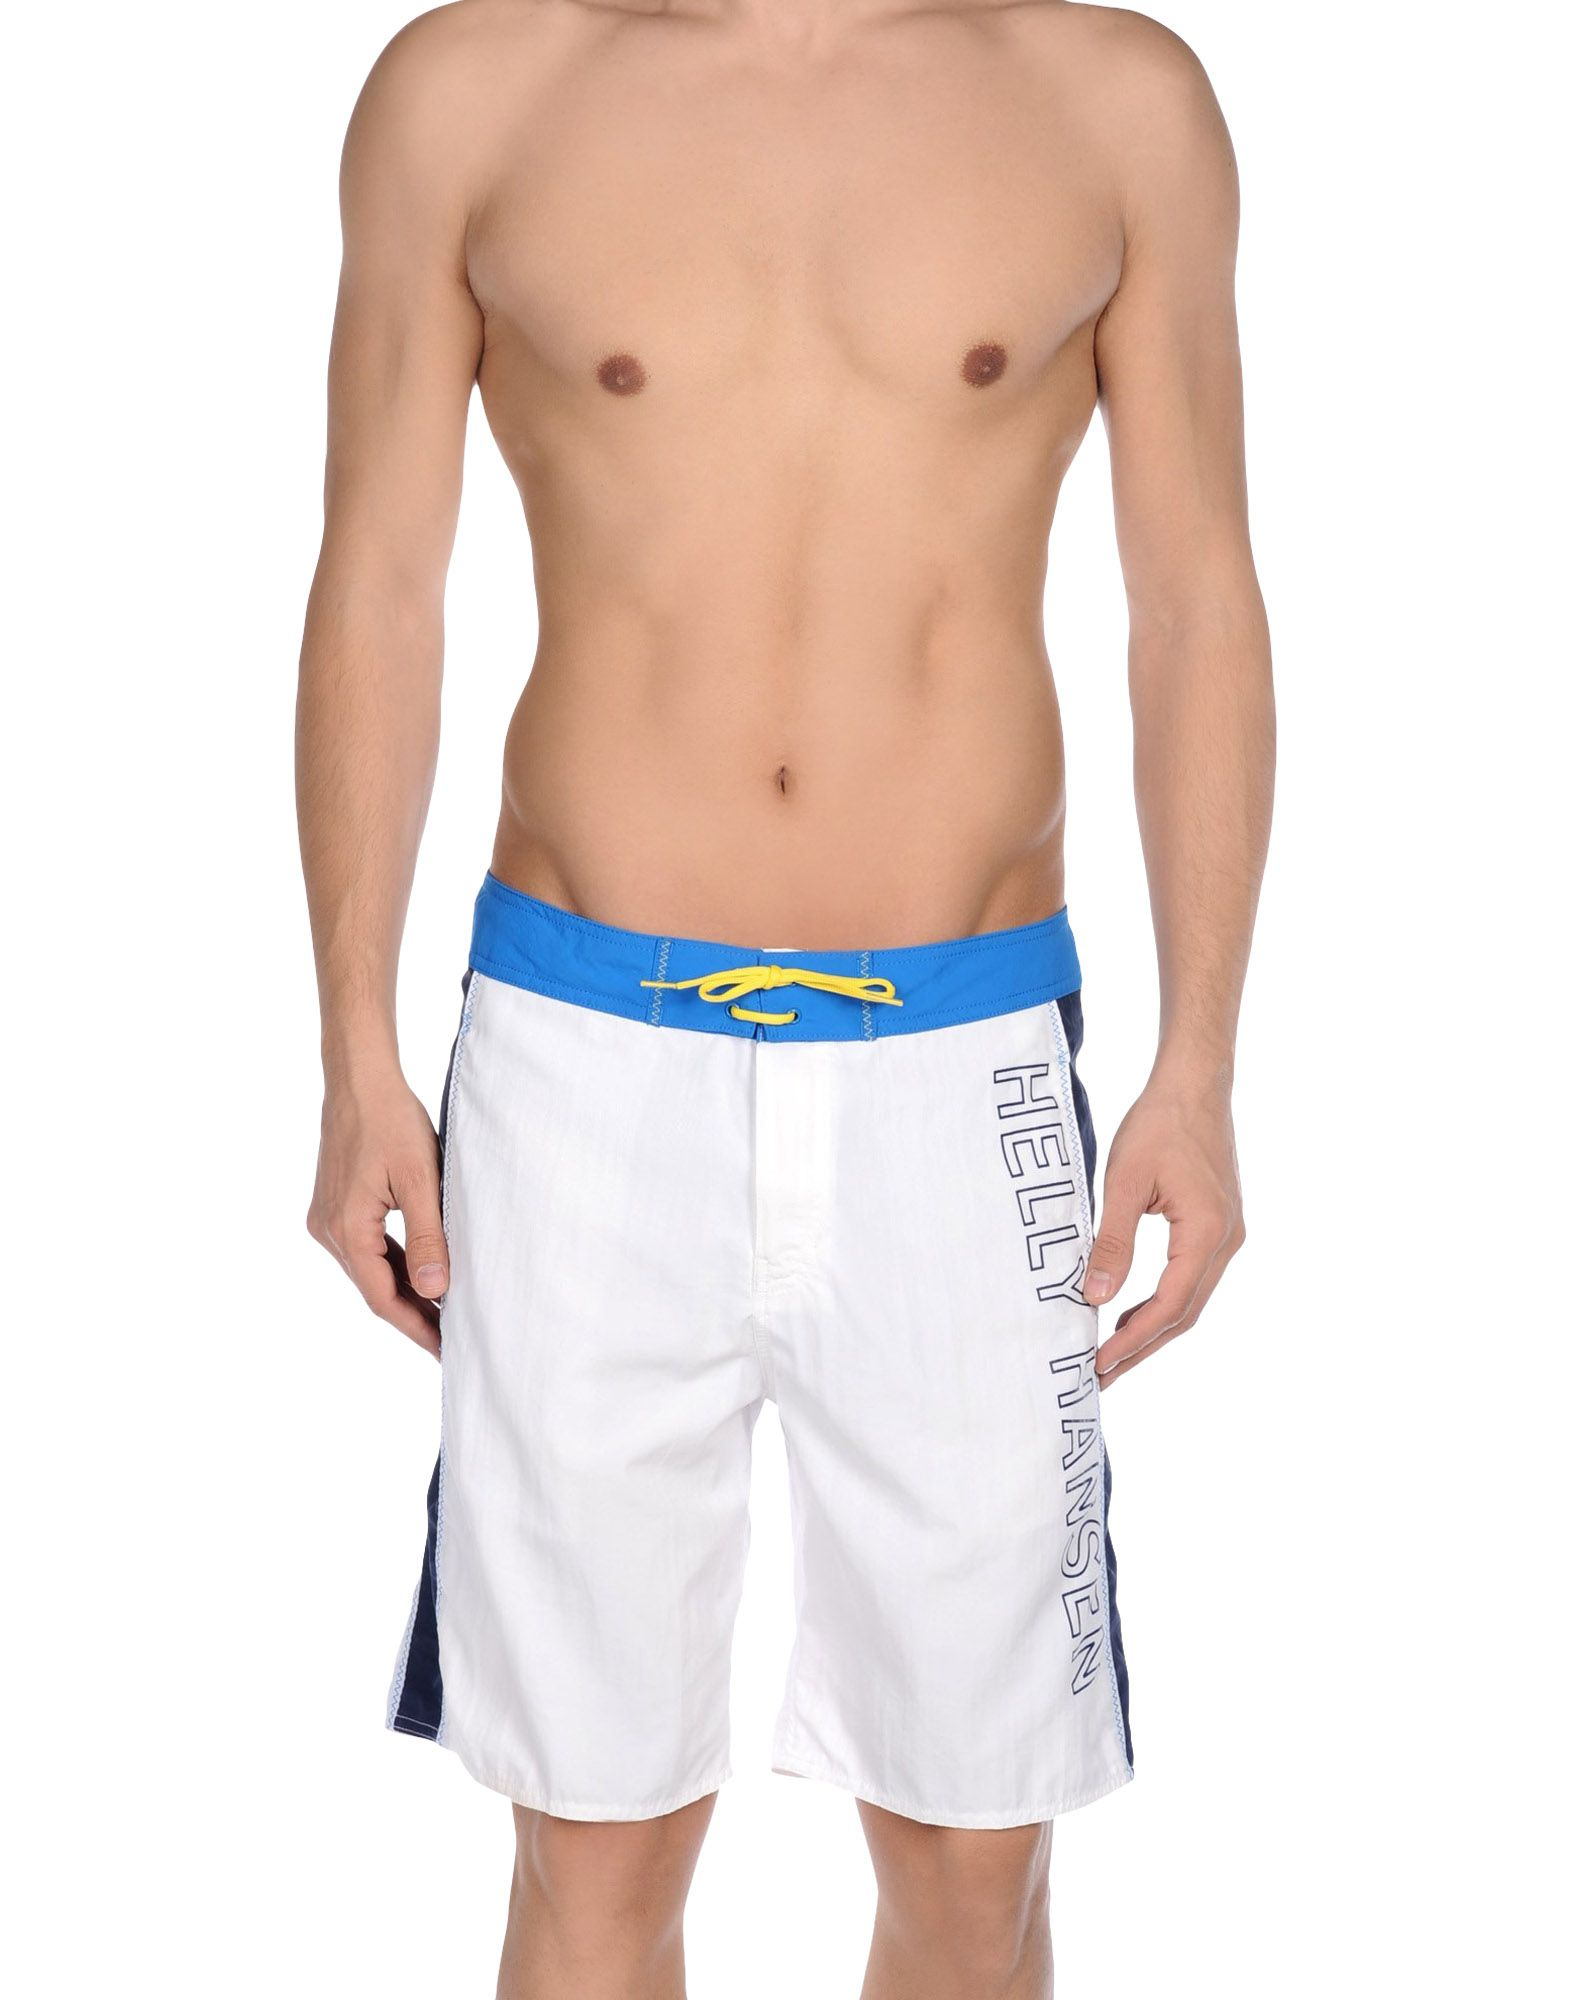 Helly Hansen Synthetic Swimming Trunk in White for Men - Lyst